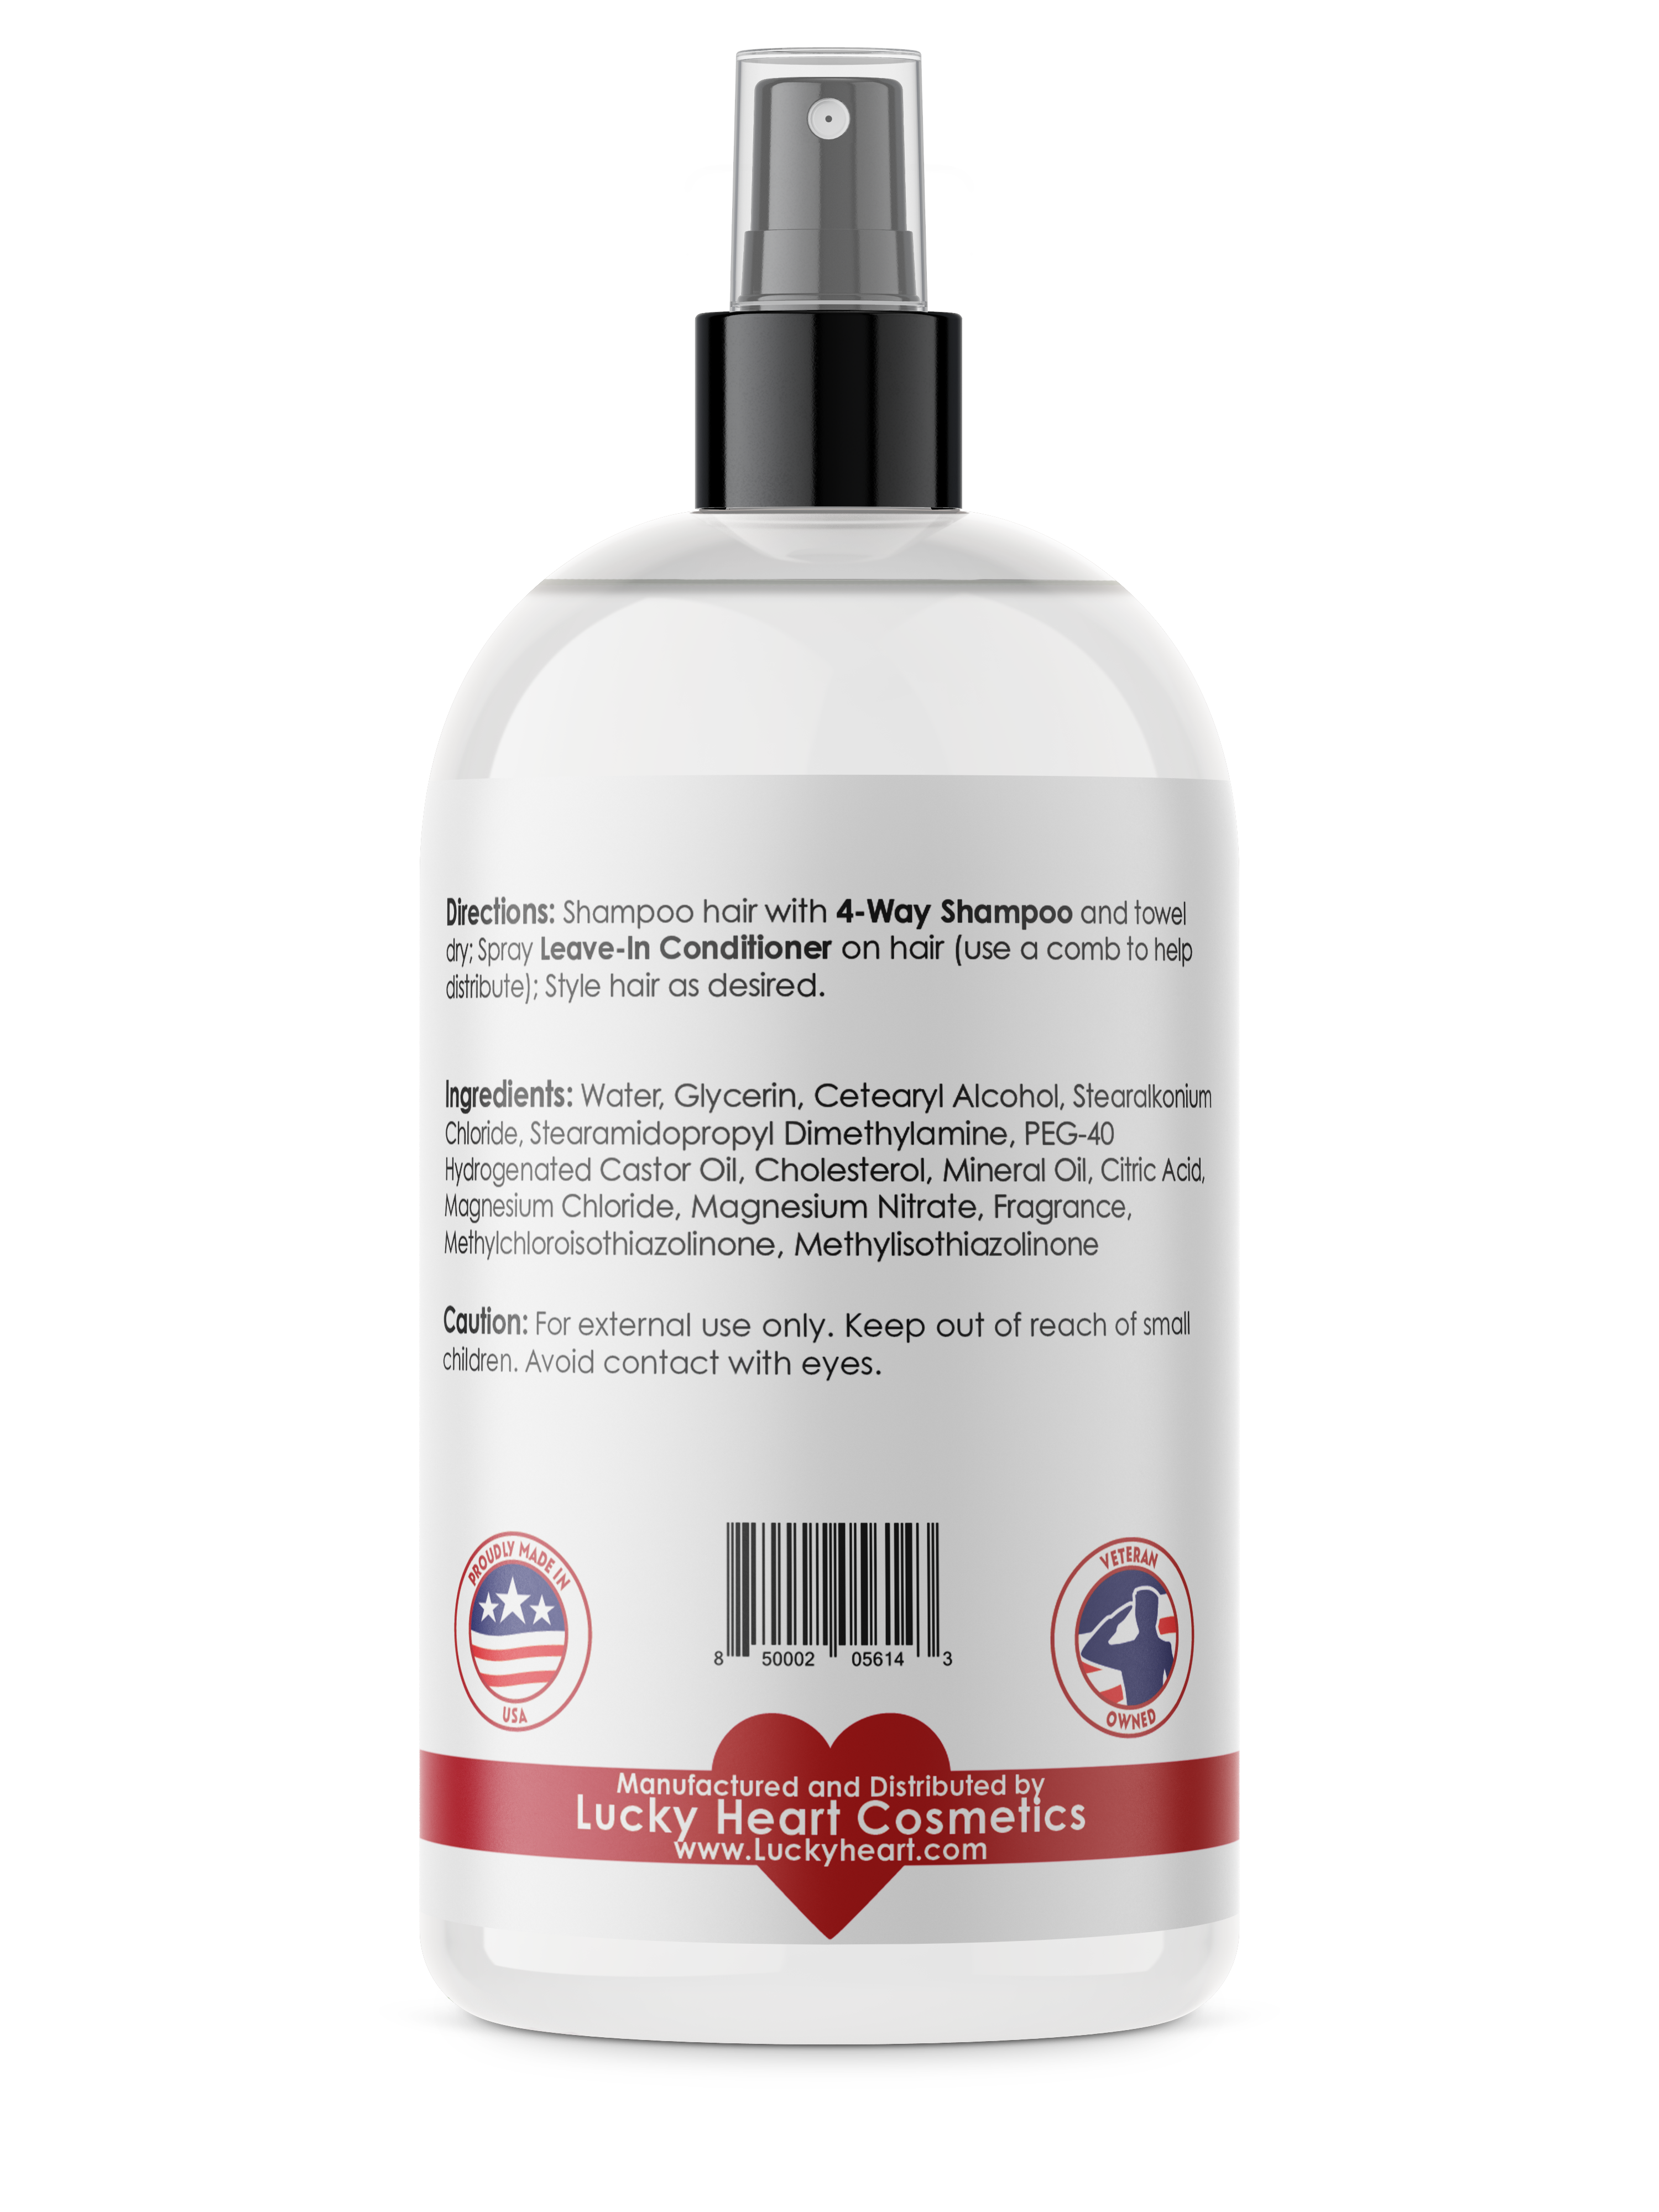 Label and ingredients and directions for use of leave-in conditioner.